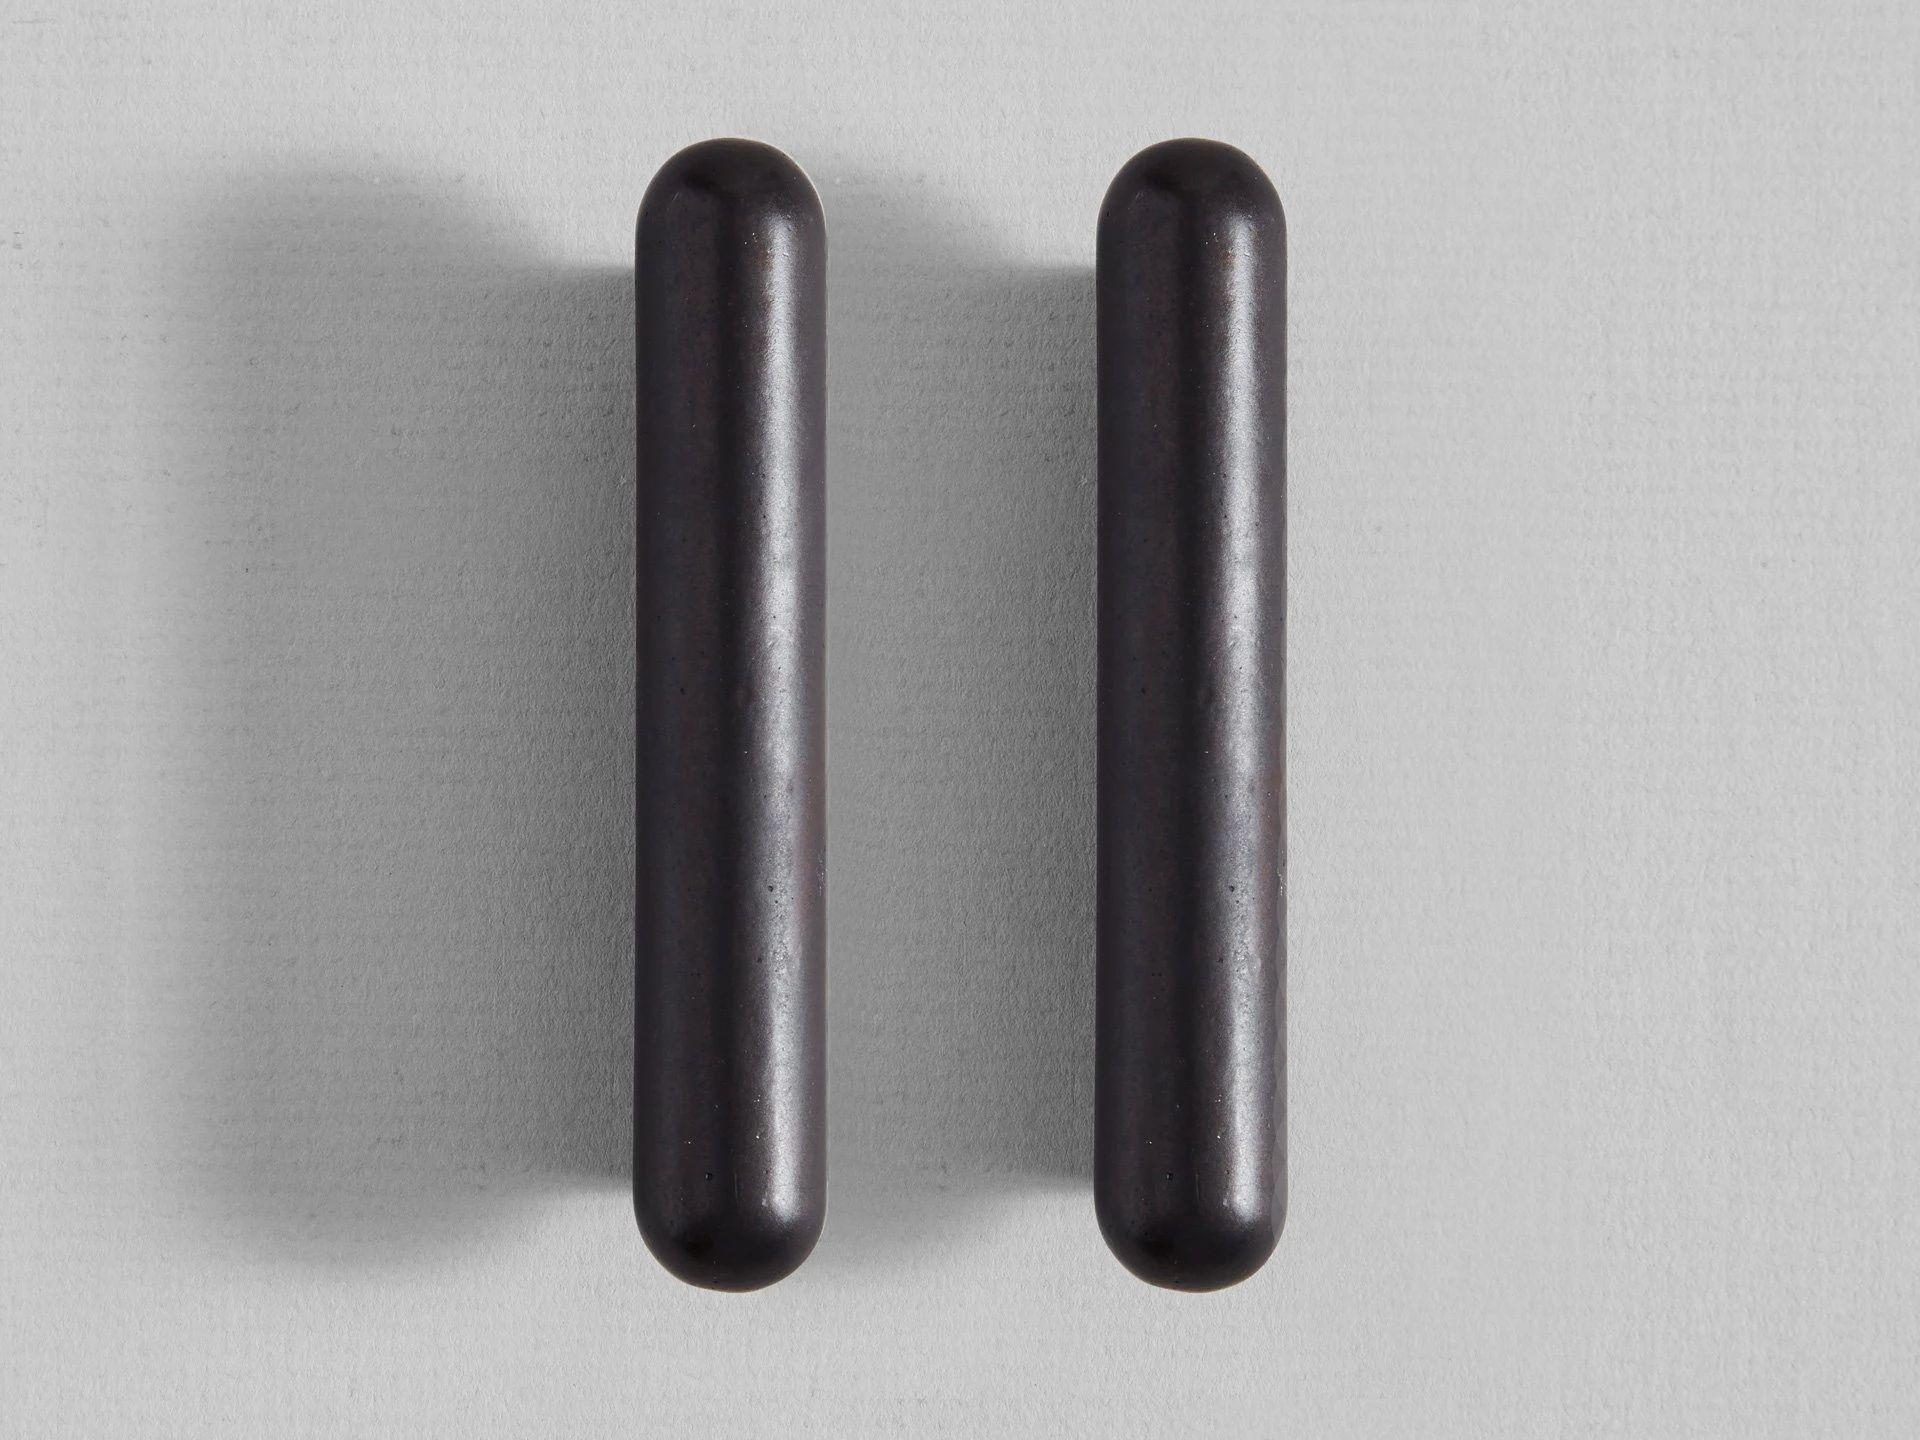 Set of 2 Polished Blackened Bronze PSL Handles by Henry Wilson
Dimensions: W 2 x D 3 x H 9 cm 
Materials: Bronze, polished, heat treated
Also available in XL dimensions 20.5 x 2.6 x 1.6 cm

This versatile handle can be used for cabinetry, sliding